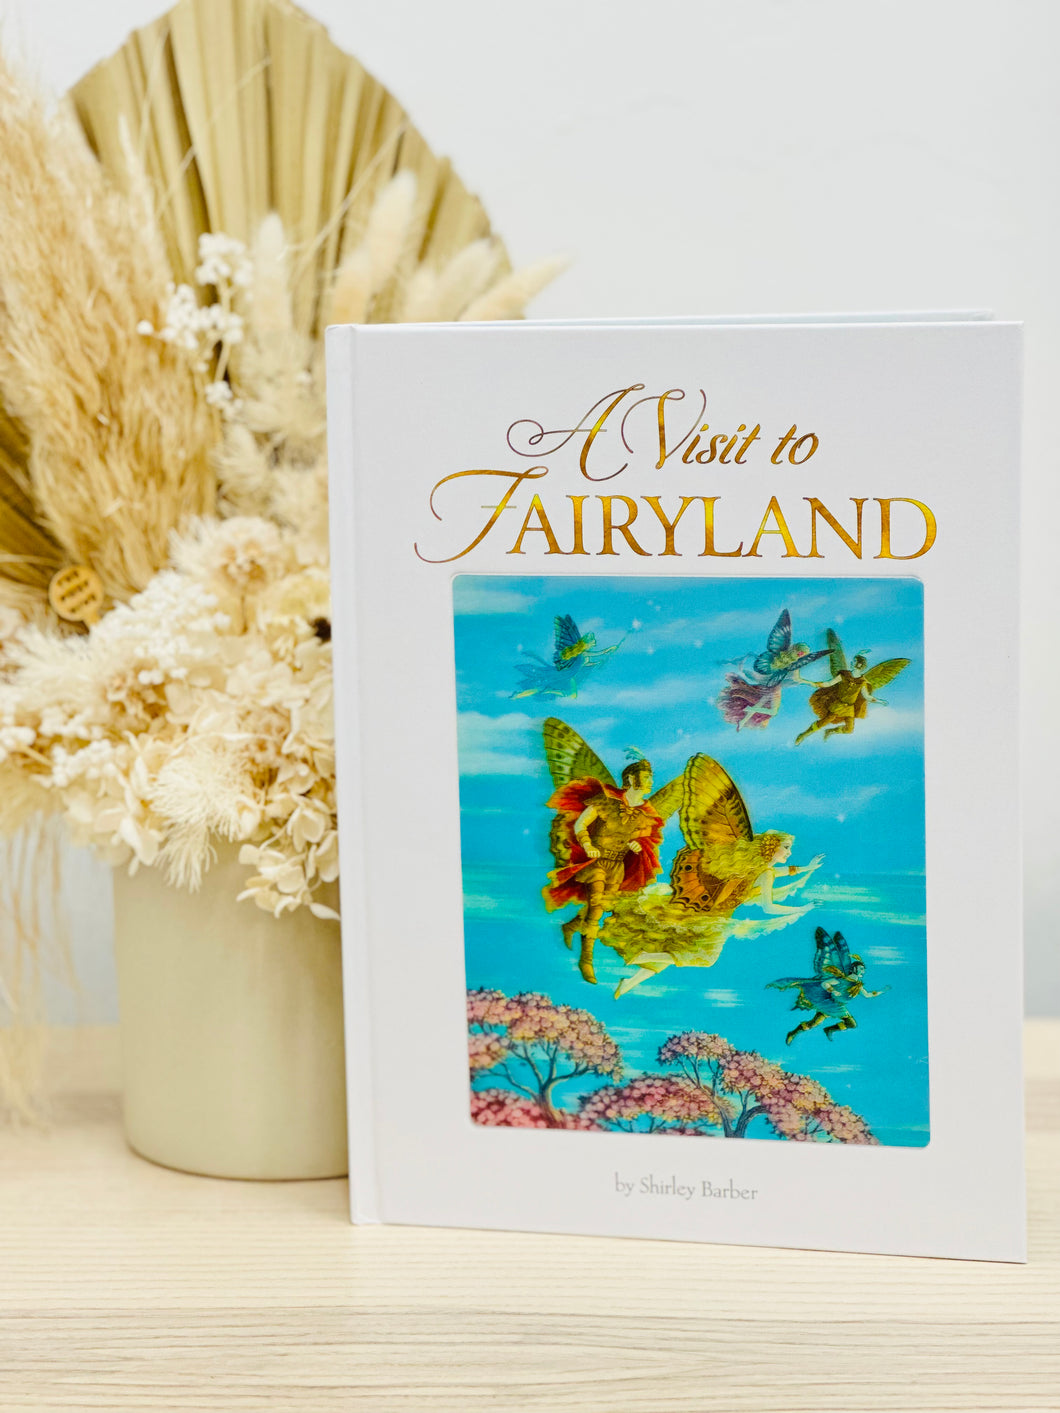 A Visit to Fairyland (lenticular edition) Shirley Barber